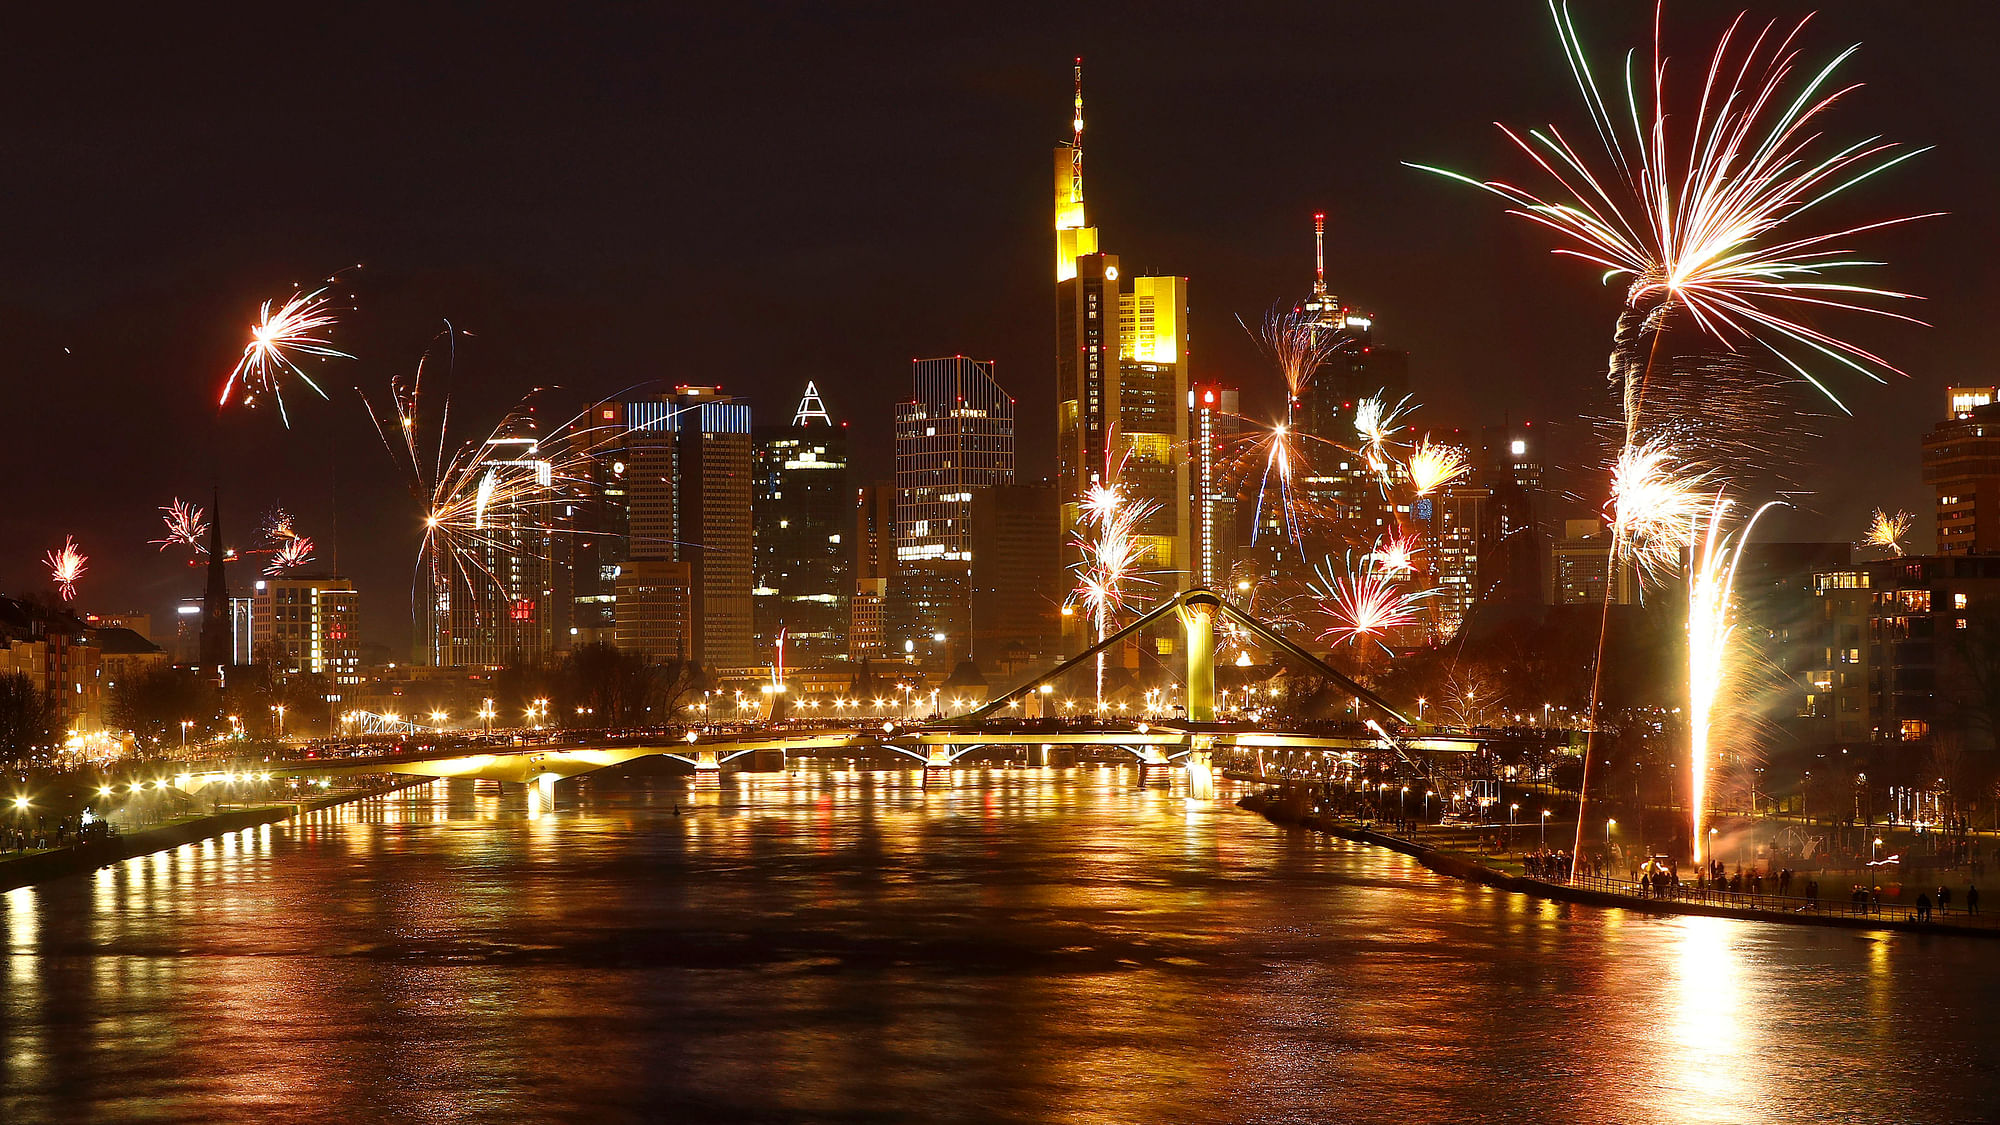 Fireworks explode in front of the skyline with the financial district during New Year’s eve celebrations in Frankfurt, Germany.